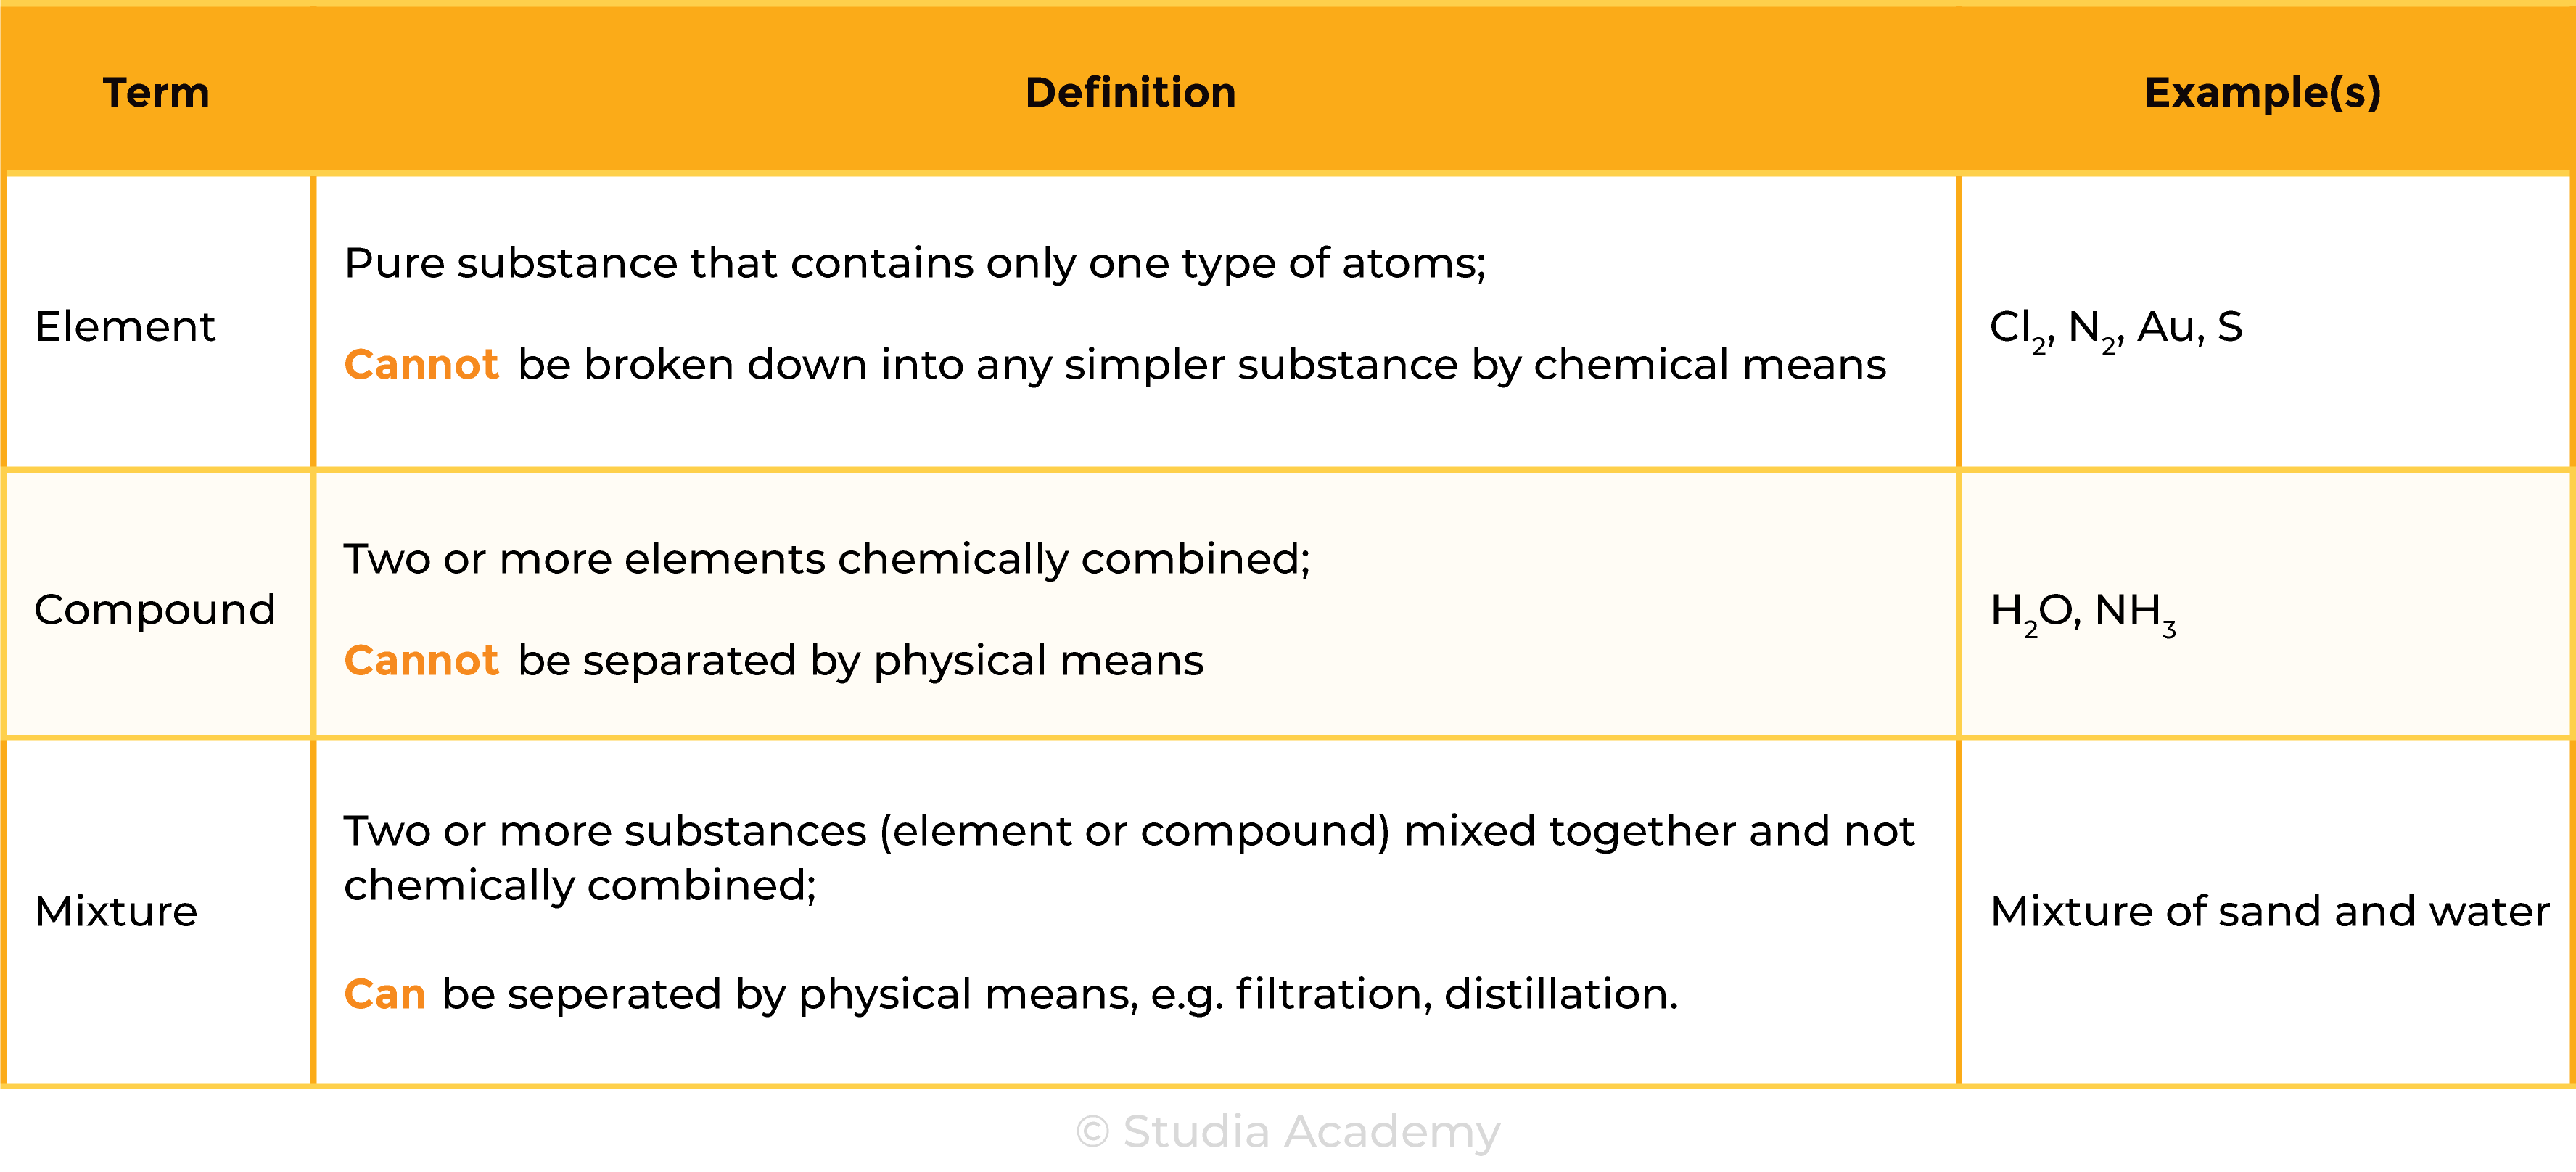 edexcel_igcse_chemistry_topic 02 tables_ elements, compounds and mixtures_001_ definitions and examples